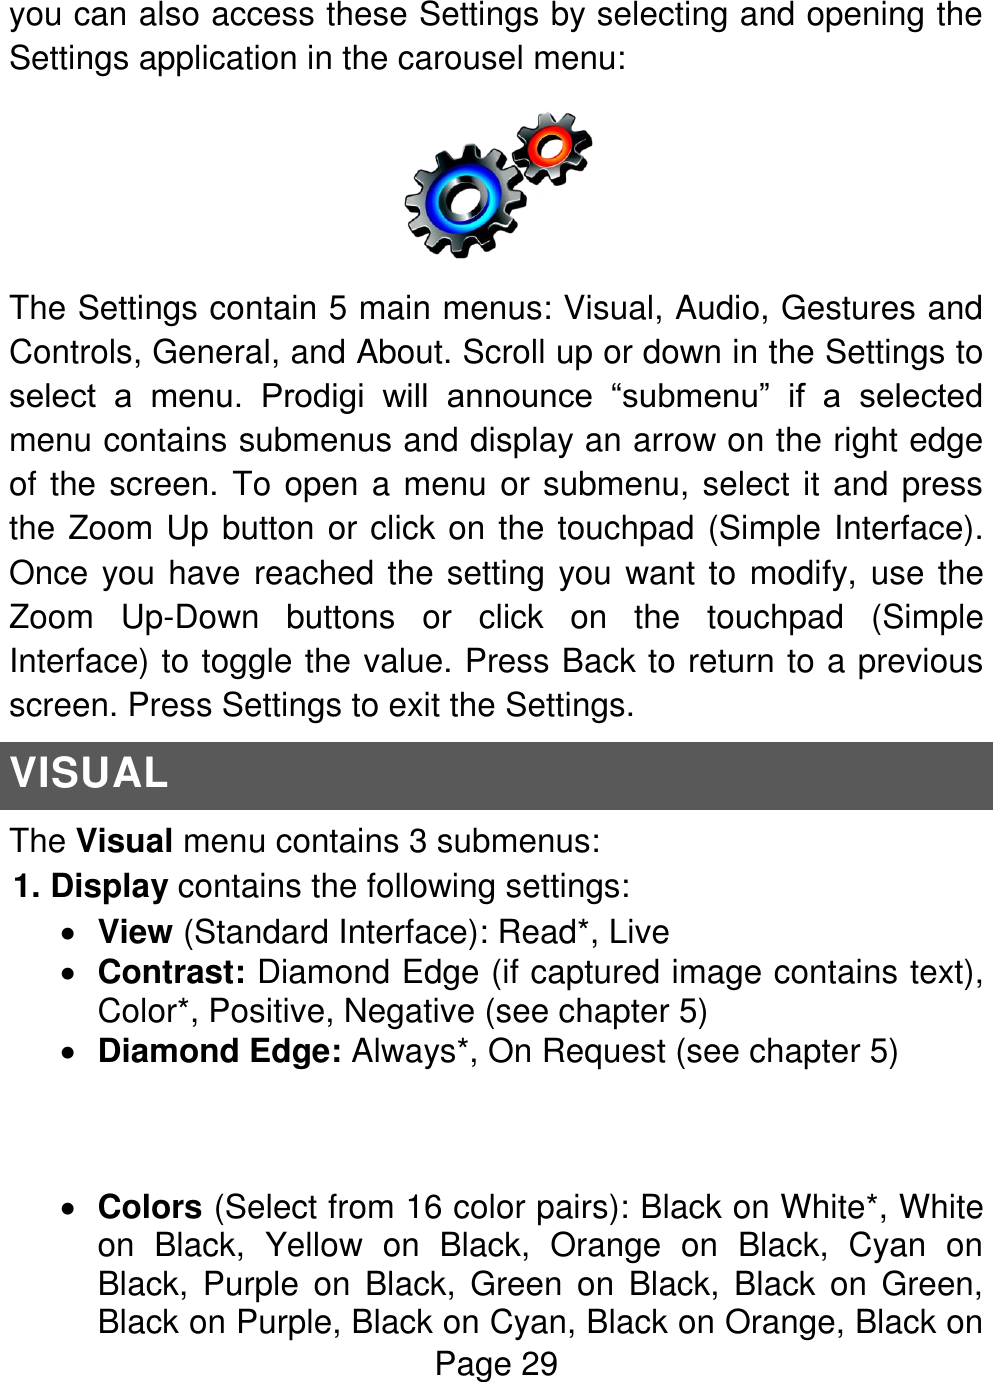 Page 29  you can also access these Settings by selecting and opening the Settings application in the carousel menu:  The Settings contain 5 main menus: Visual, Audio, Gestures and Controls, General, and About. Scroll up or down in the Settings to select  a  menu.  Prodigi  will  announce  “submenu”  if  a  selected menu contains submenus and display an arrow on the right edge of the screen. To open a menu or submenu, select it and press the Zoom Up button or click on the touchpad (Simple Interface). Once you have reached the setting you want to modify, use the Zoom  Up-Down  buttons  or  click  on  the  touchpad  (Simple Interface) to toggle the value. Press Back to return to a previous screen. Press Settings to exit the Settings. VISUAL The Visual menu contains 3 submenus: 1. Display contains the following settings:  View (Standard Interface): Read*, Live  Contrast: Diamond Edge (if captured image contains text), Color*, Positive, Negative (see chapter 5)  Diamond Edge: Always*, On Request (see chapter 5)     Colors (Select from 16 color pairs): Black on White*, White on  Black,  Yellow  on  Black,  Orange  on  Black,  Cyan  on Black,  Purple  on  Black,  Green on  Black,  Black  on  Green, Black on Purple, Black on Cyan, Black on Orange, Black on 